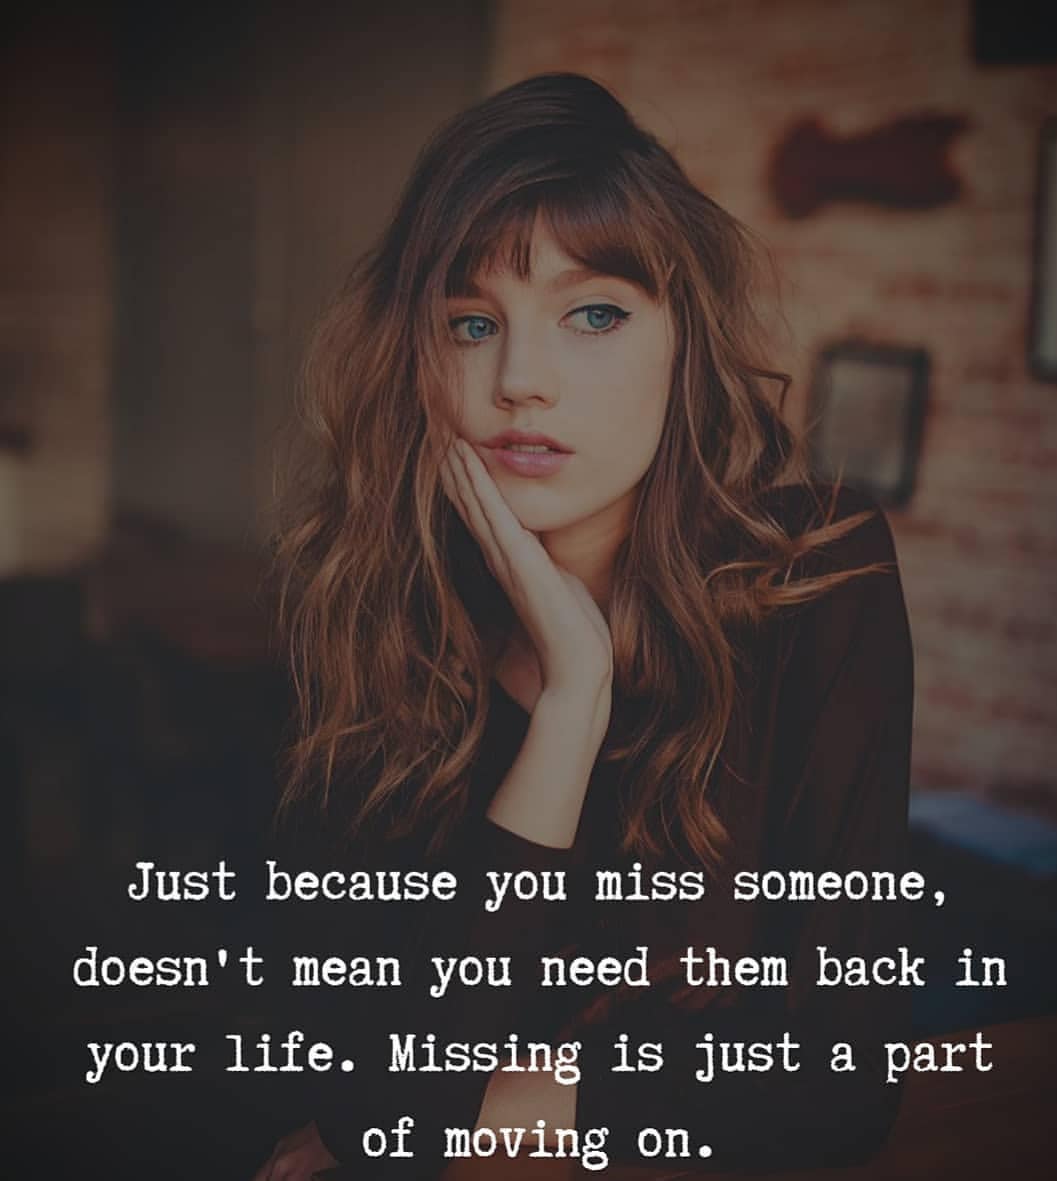 Just because you miss someone, doesn't mean you need them back in your life. Missing is just a part of moving on.